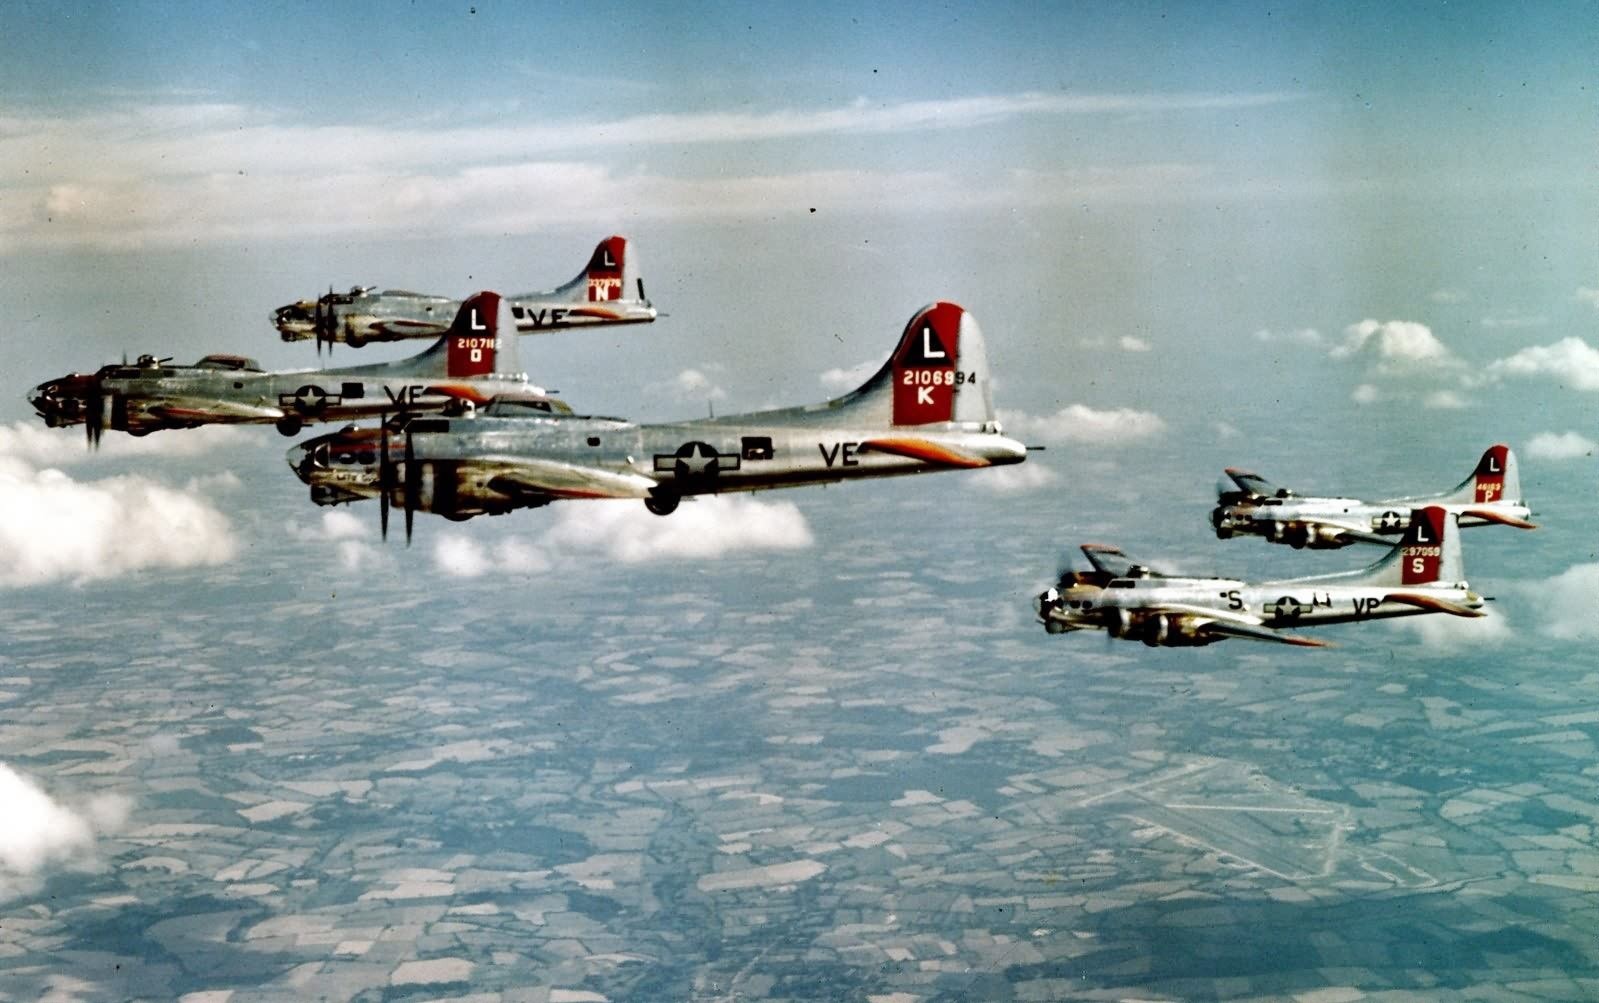 381st_Bomb_Group_B-17_formation_in_color_1~2.jpg